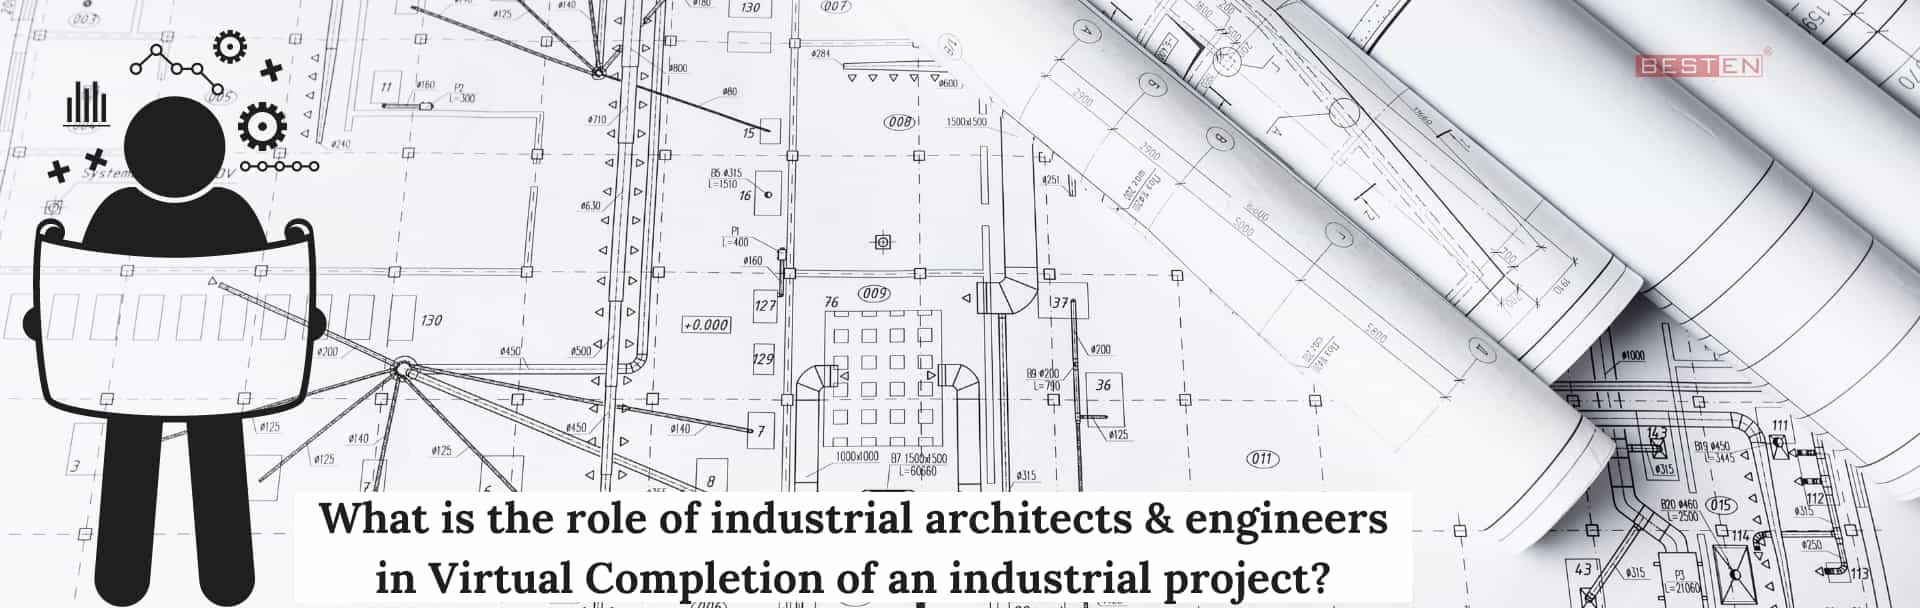 Industrial Architects & engineers